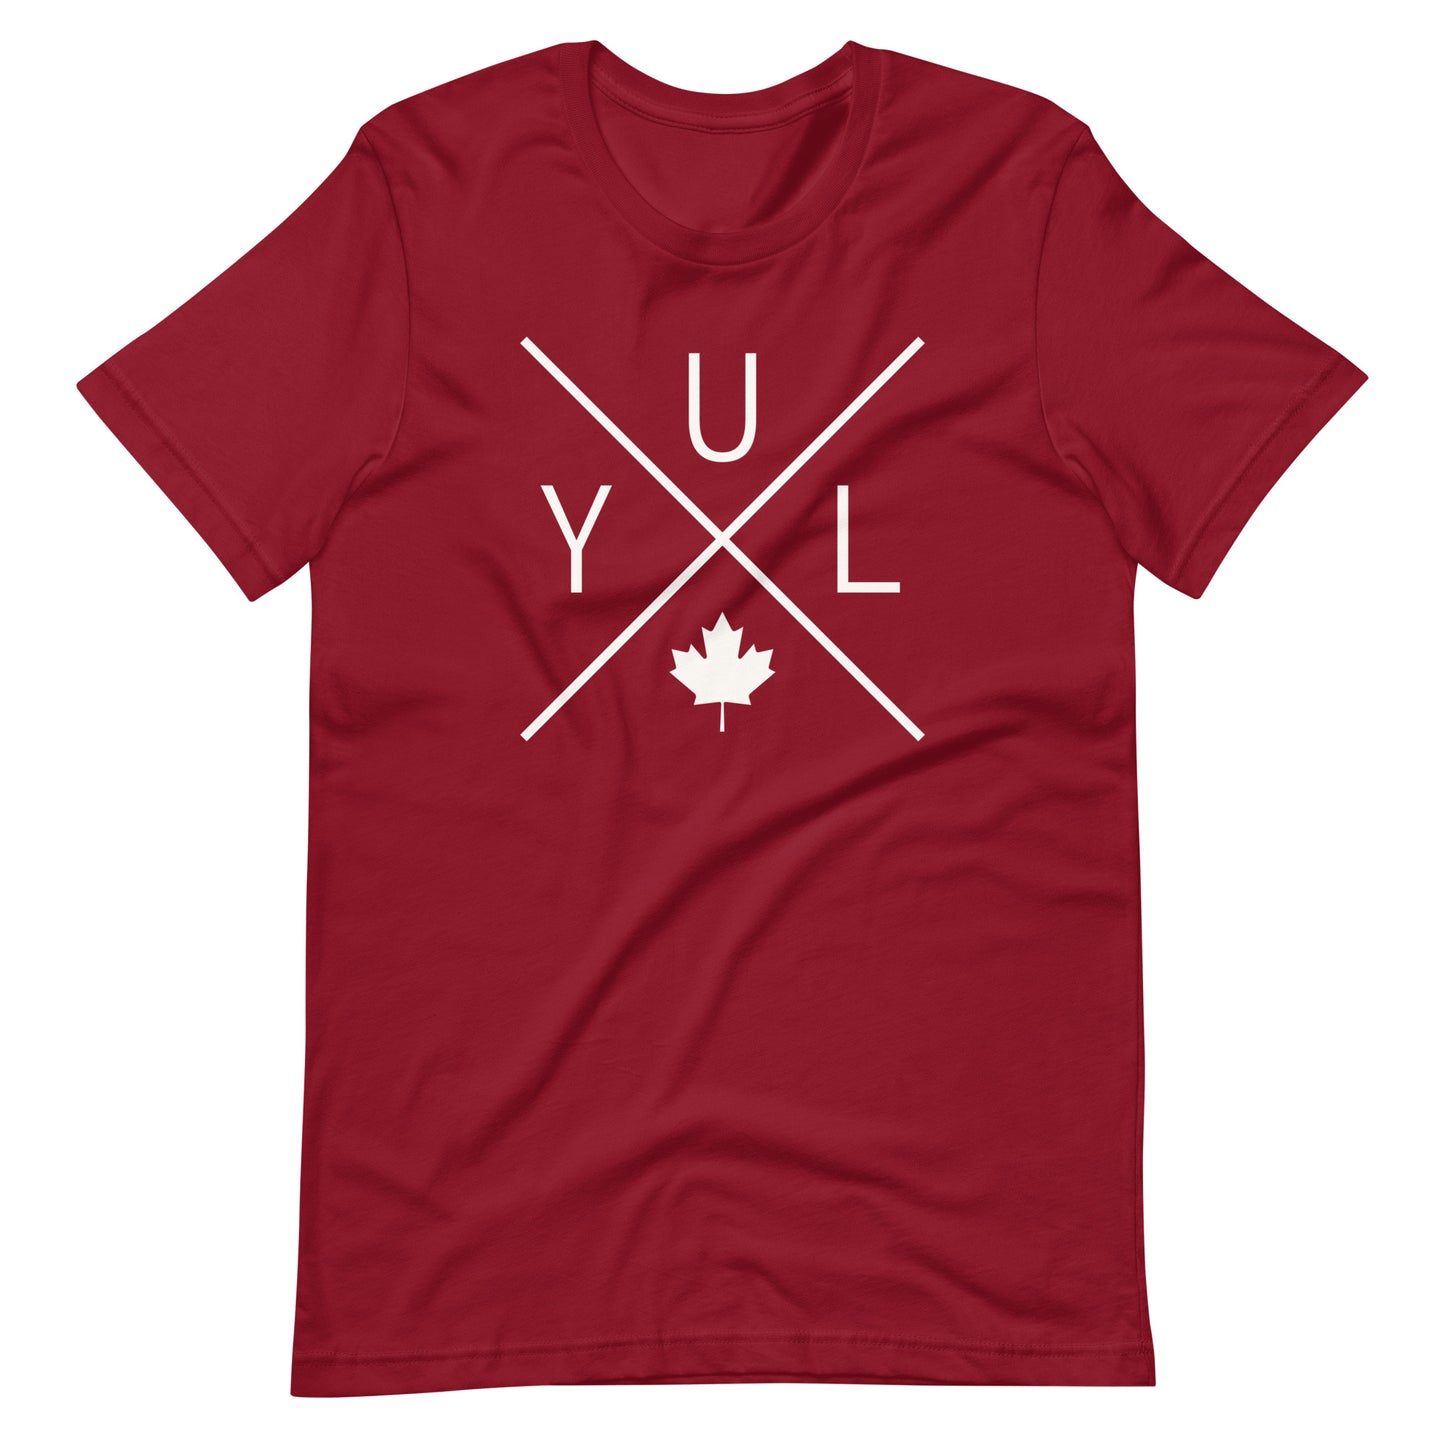 Crossed-X T-Shirt - White Graphic • YUL Montreal • YHM Designs - Image 04